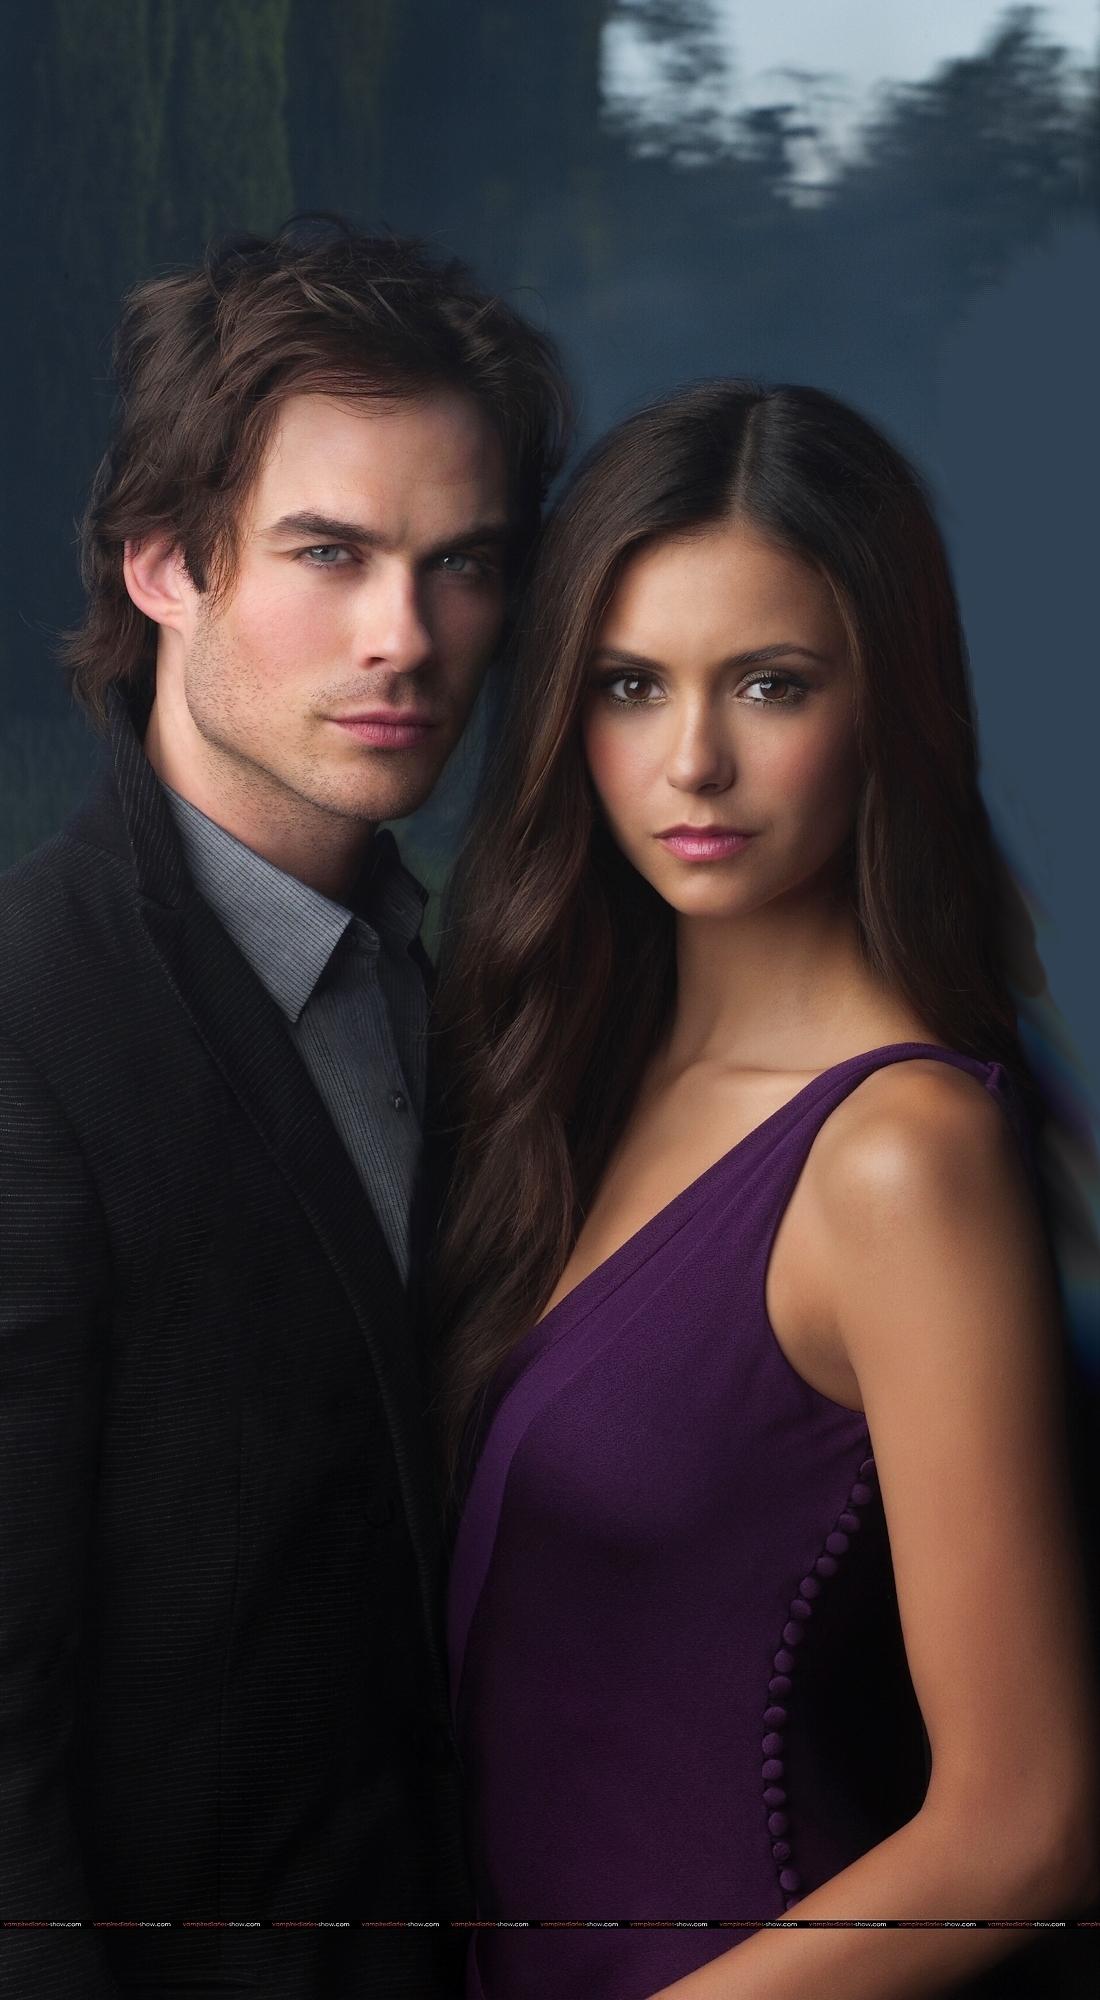 http://images2.fanpop.com/image/photos/9800000/promo-picture-damon-and-elena-9813728-1100-2000.jpg